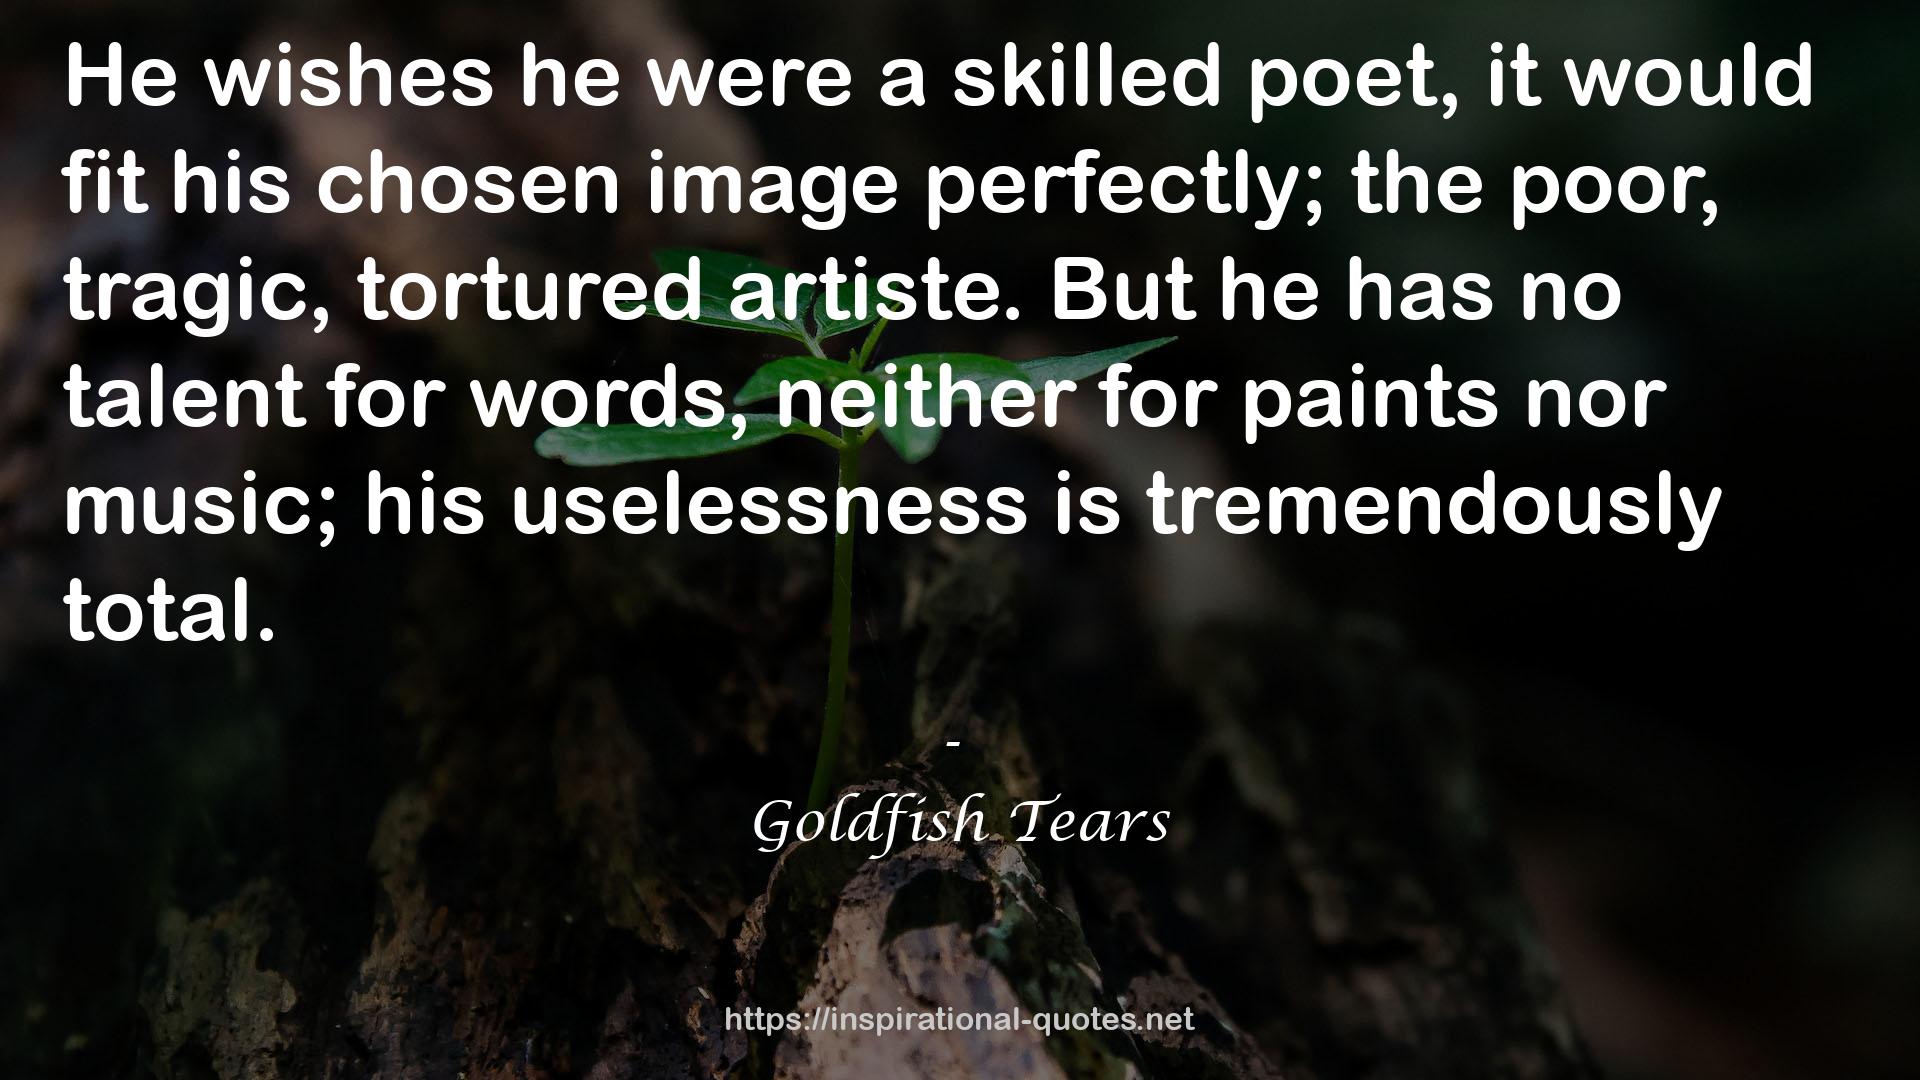 Goldfish Tears QUOTES